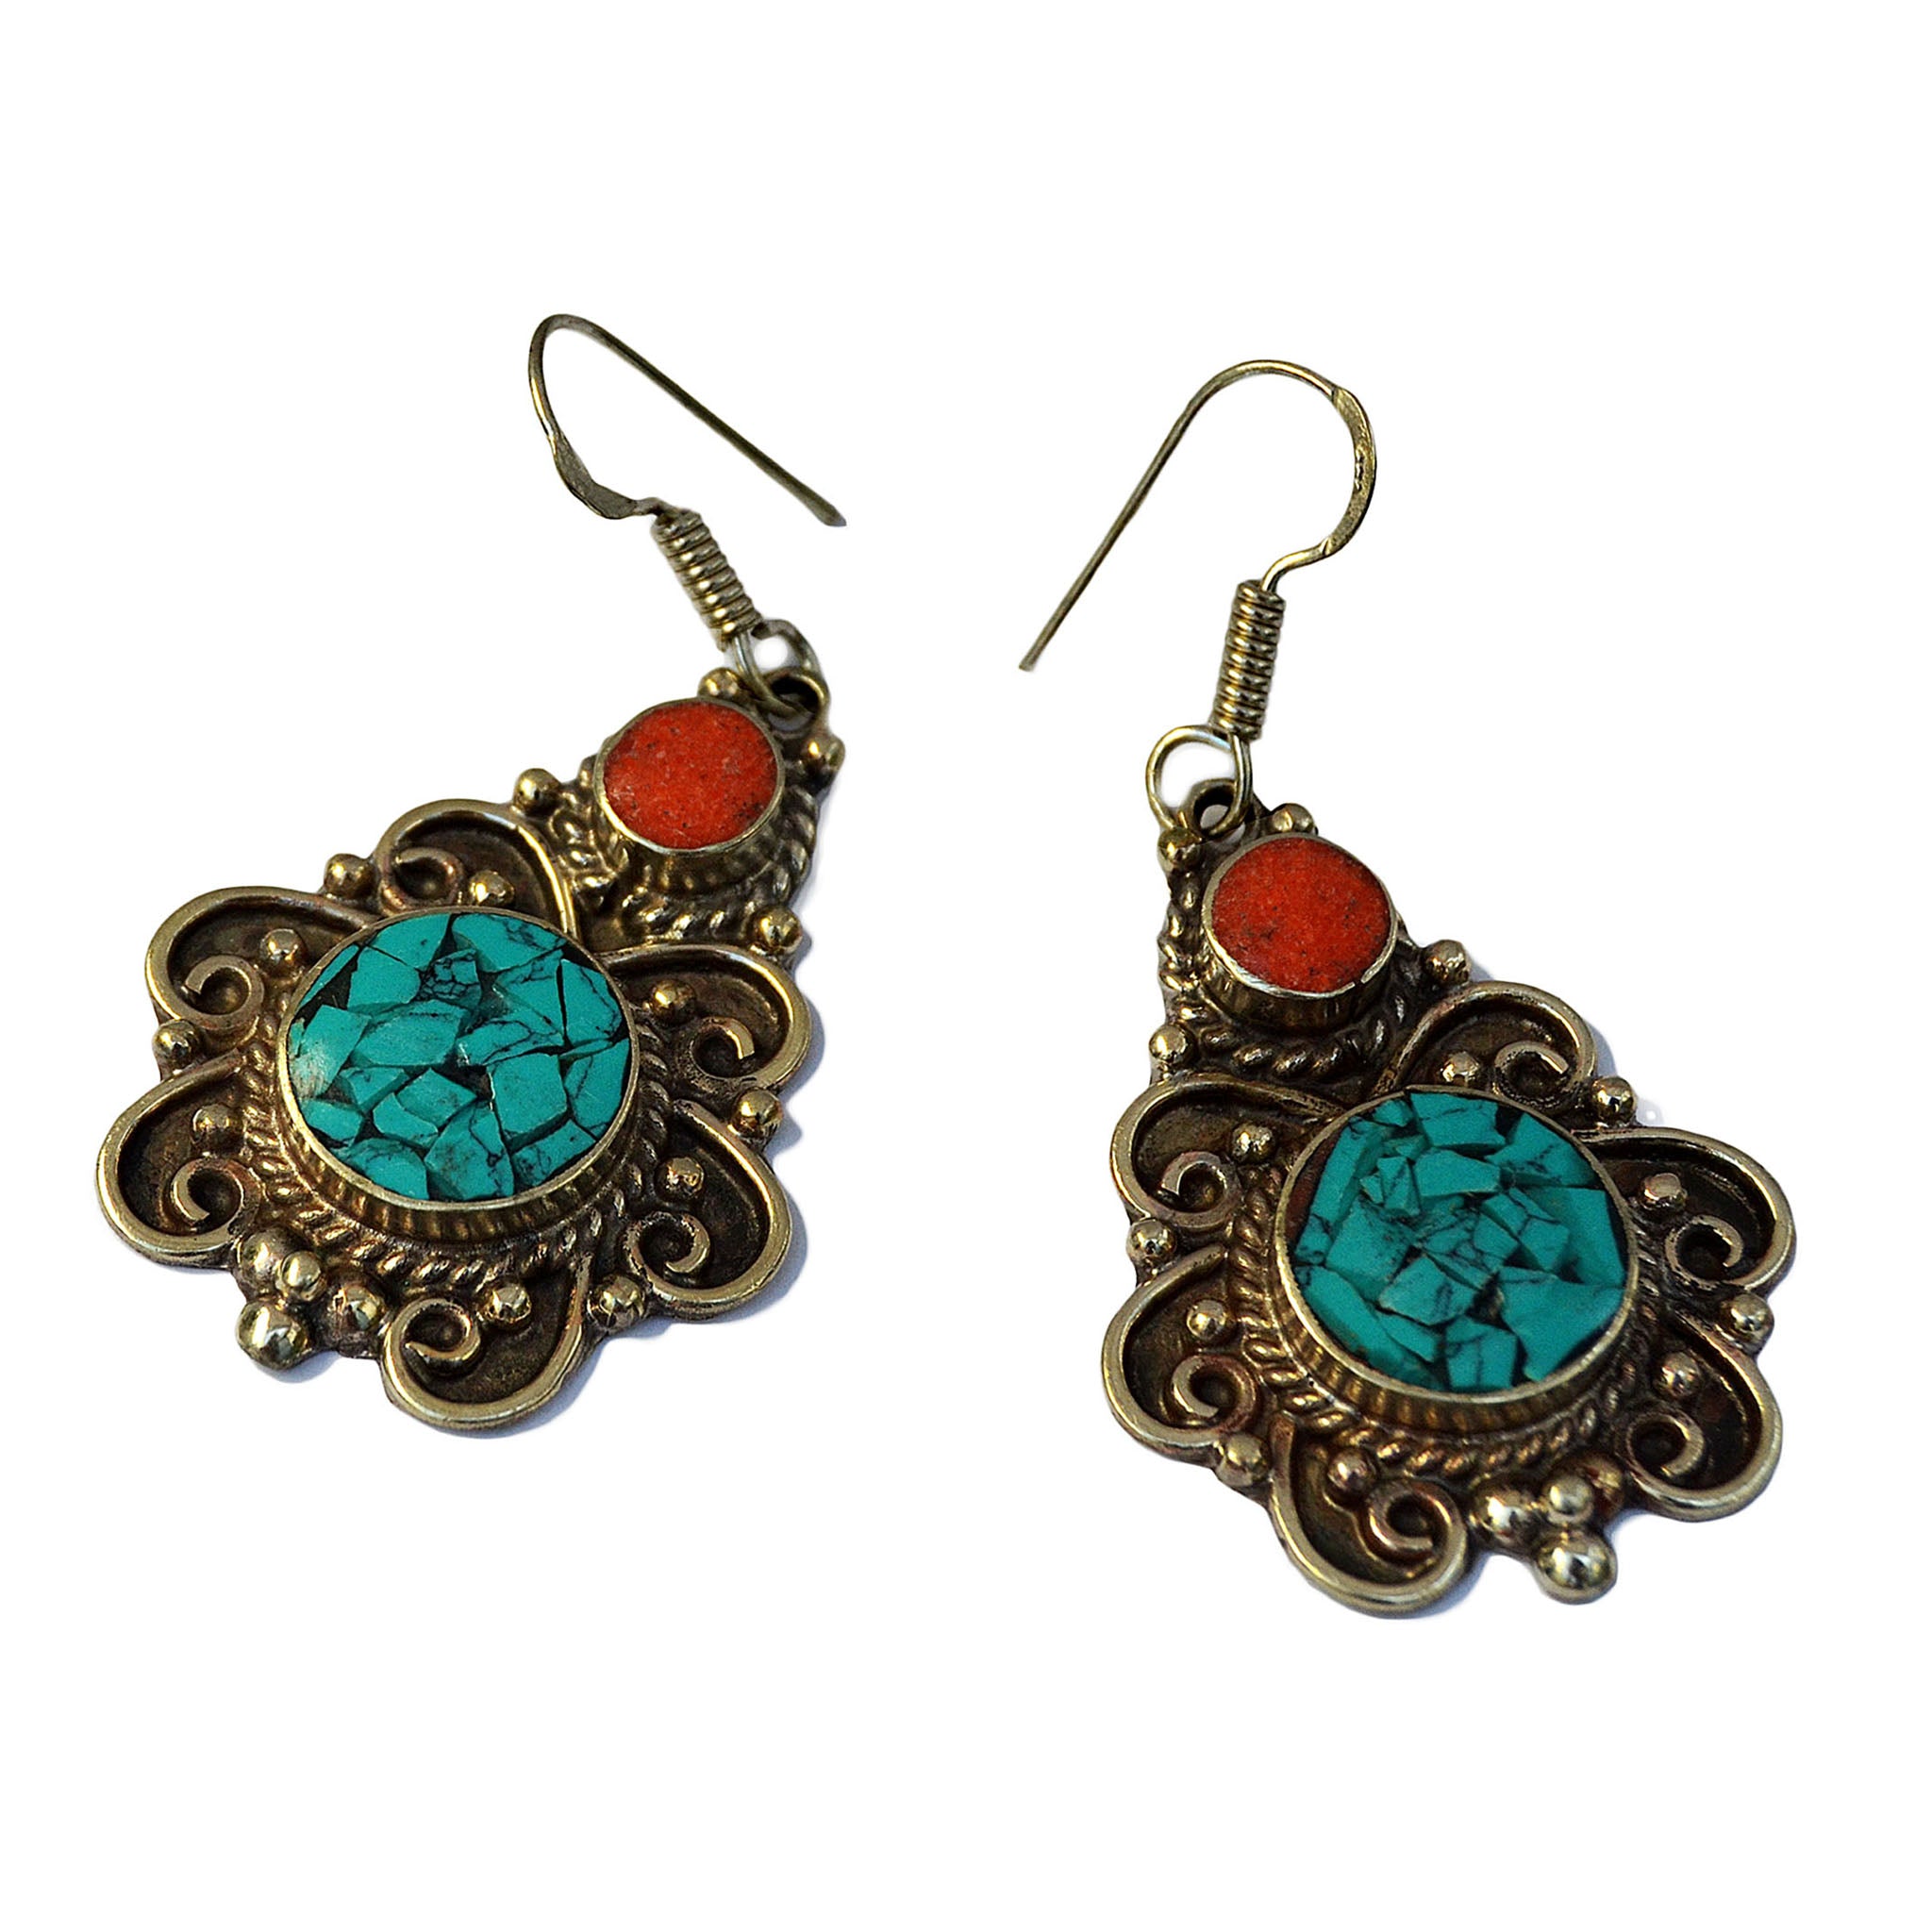 Traditional nepal drop earrings with red coral and turquoise stone on white background